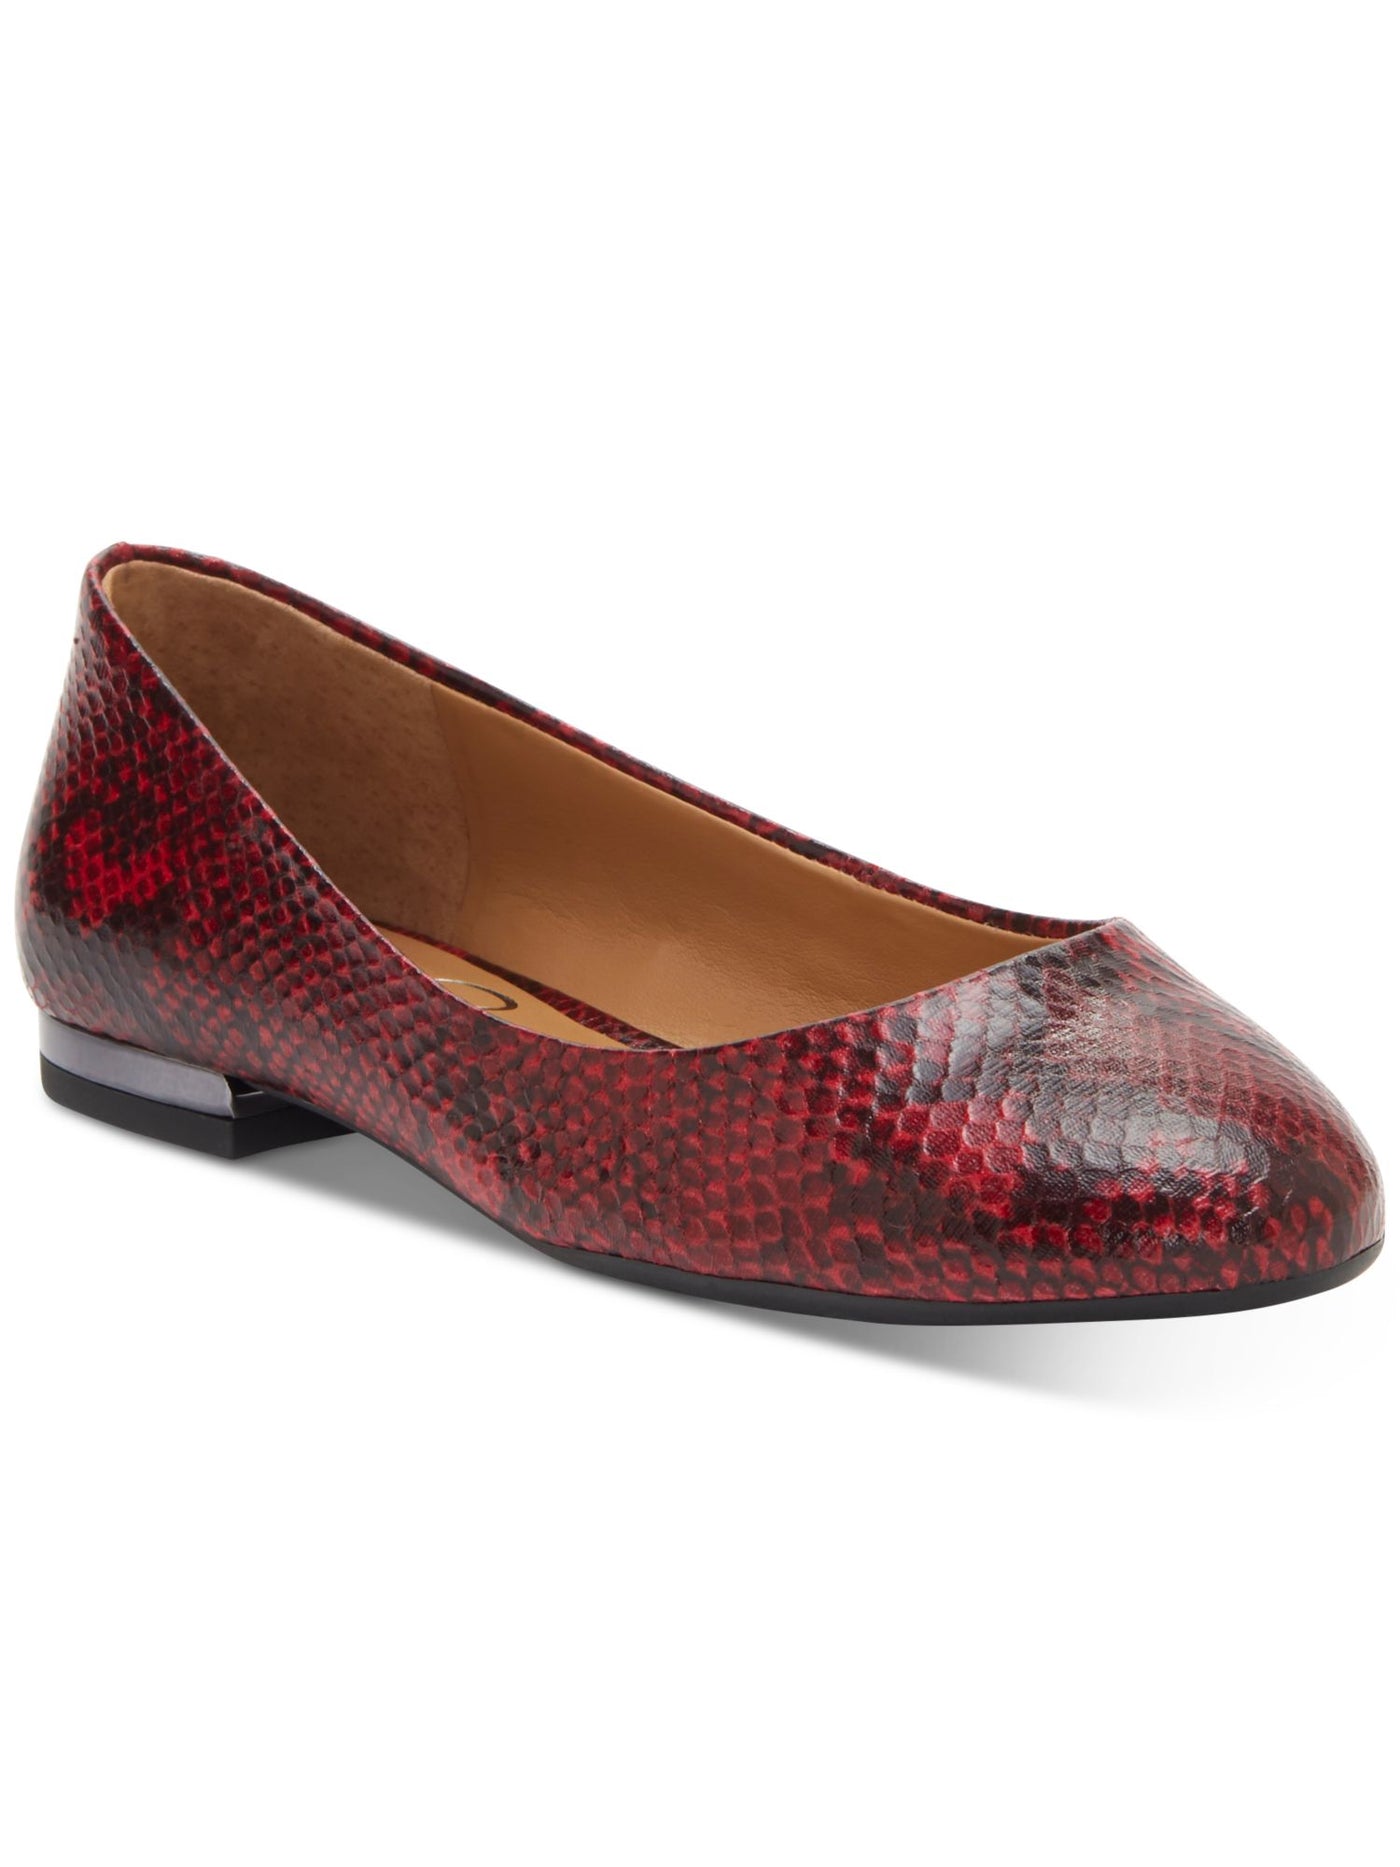 JESSICA SIMPSON Womens Red Snakeskin Metallic Heel Accent Padded Comfort Ginly Round Toe Slip On Flats Shoes 7.5 M